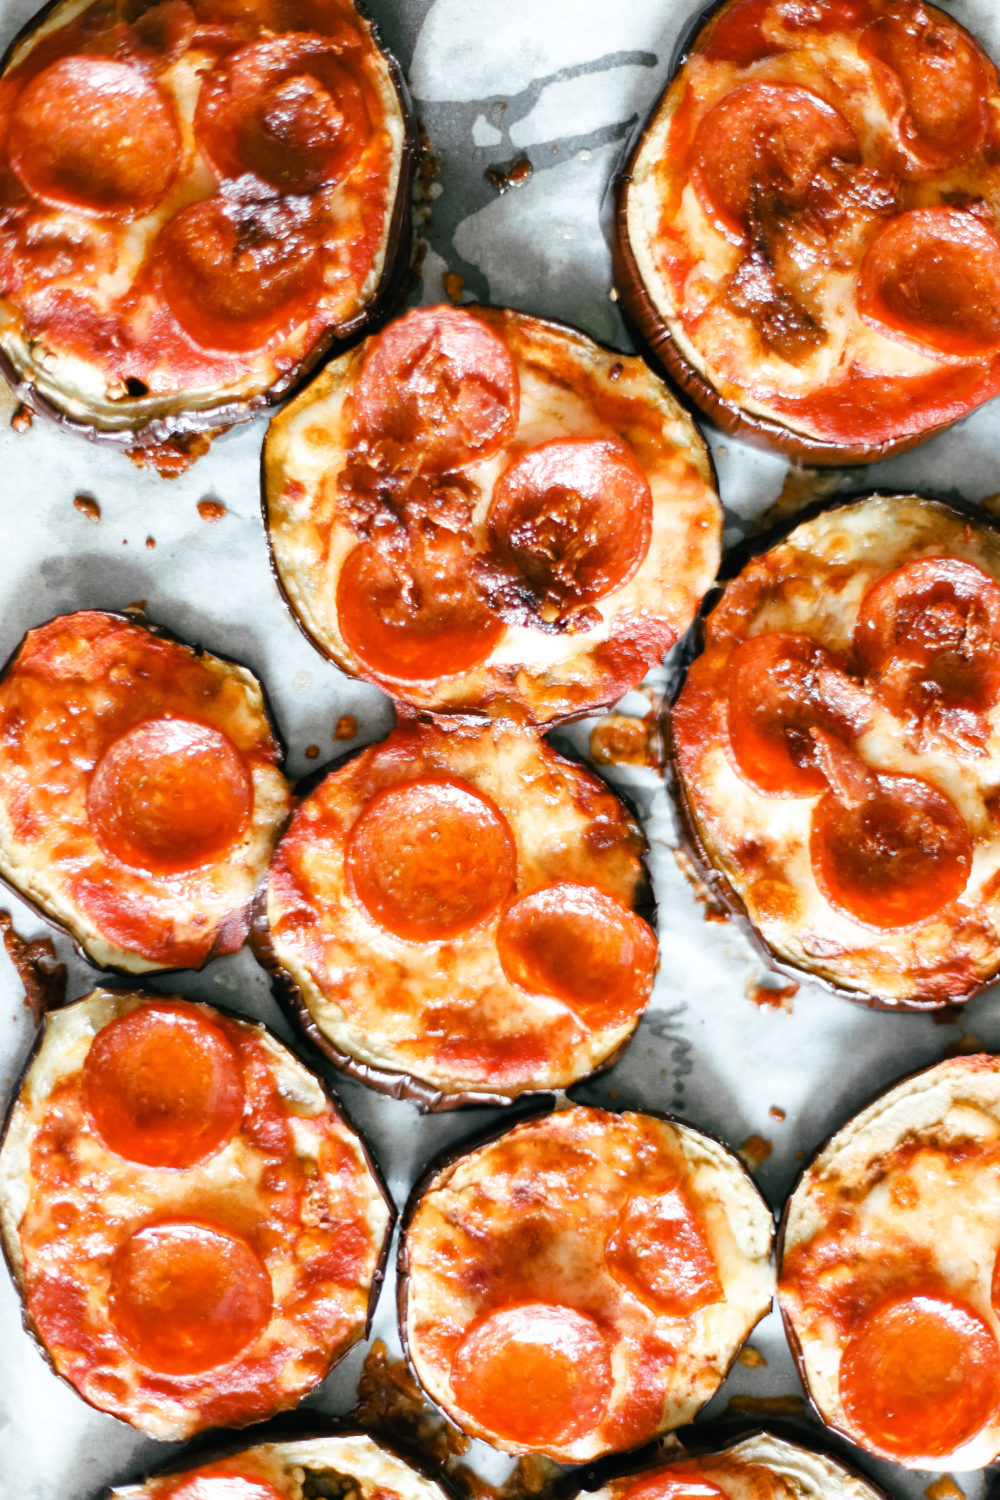 Quick and easy to make, with all the macronutrients to keep your blood sugar low and help you lose weight. Enjoy your favourite food and stay healthy! Fat Burn | Eggplant Pizza | Pepperoni Pizza | Low Carb | Keto | Gluten-Free | Mini Pizzas | Quick | Easy | Dinner Recipes | Keto Dinners | Vegetable Pizza | Veggies | Canadian Pizza | Ketogenic | 30 Minute Dinner | Ketogenic | No Bread | No Dough | Veggie Pizza | Gluten-free Pizza